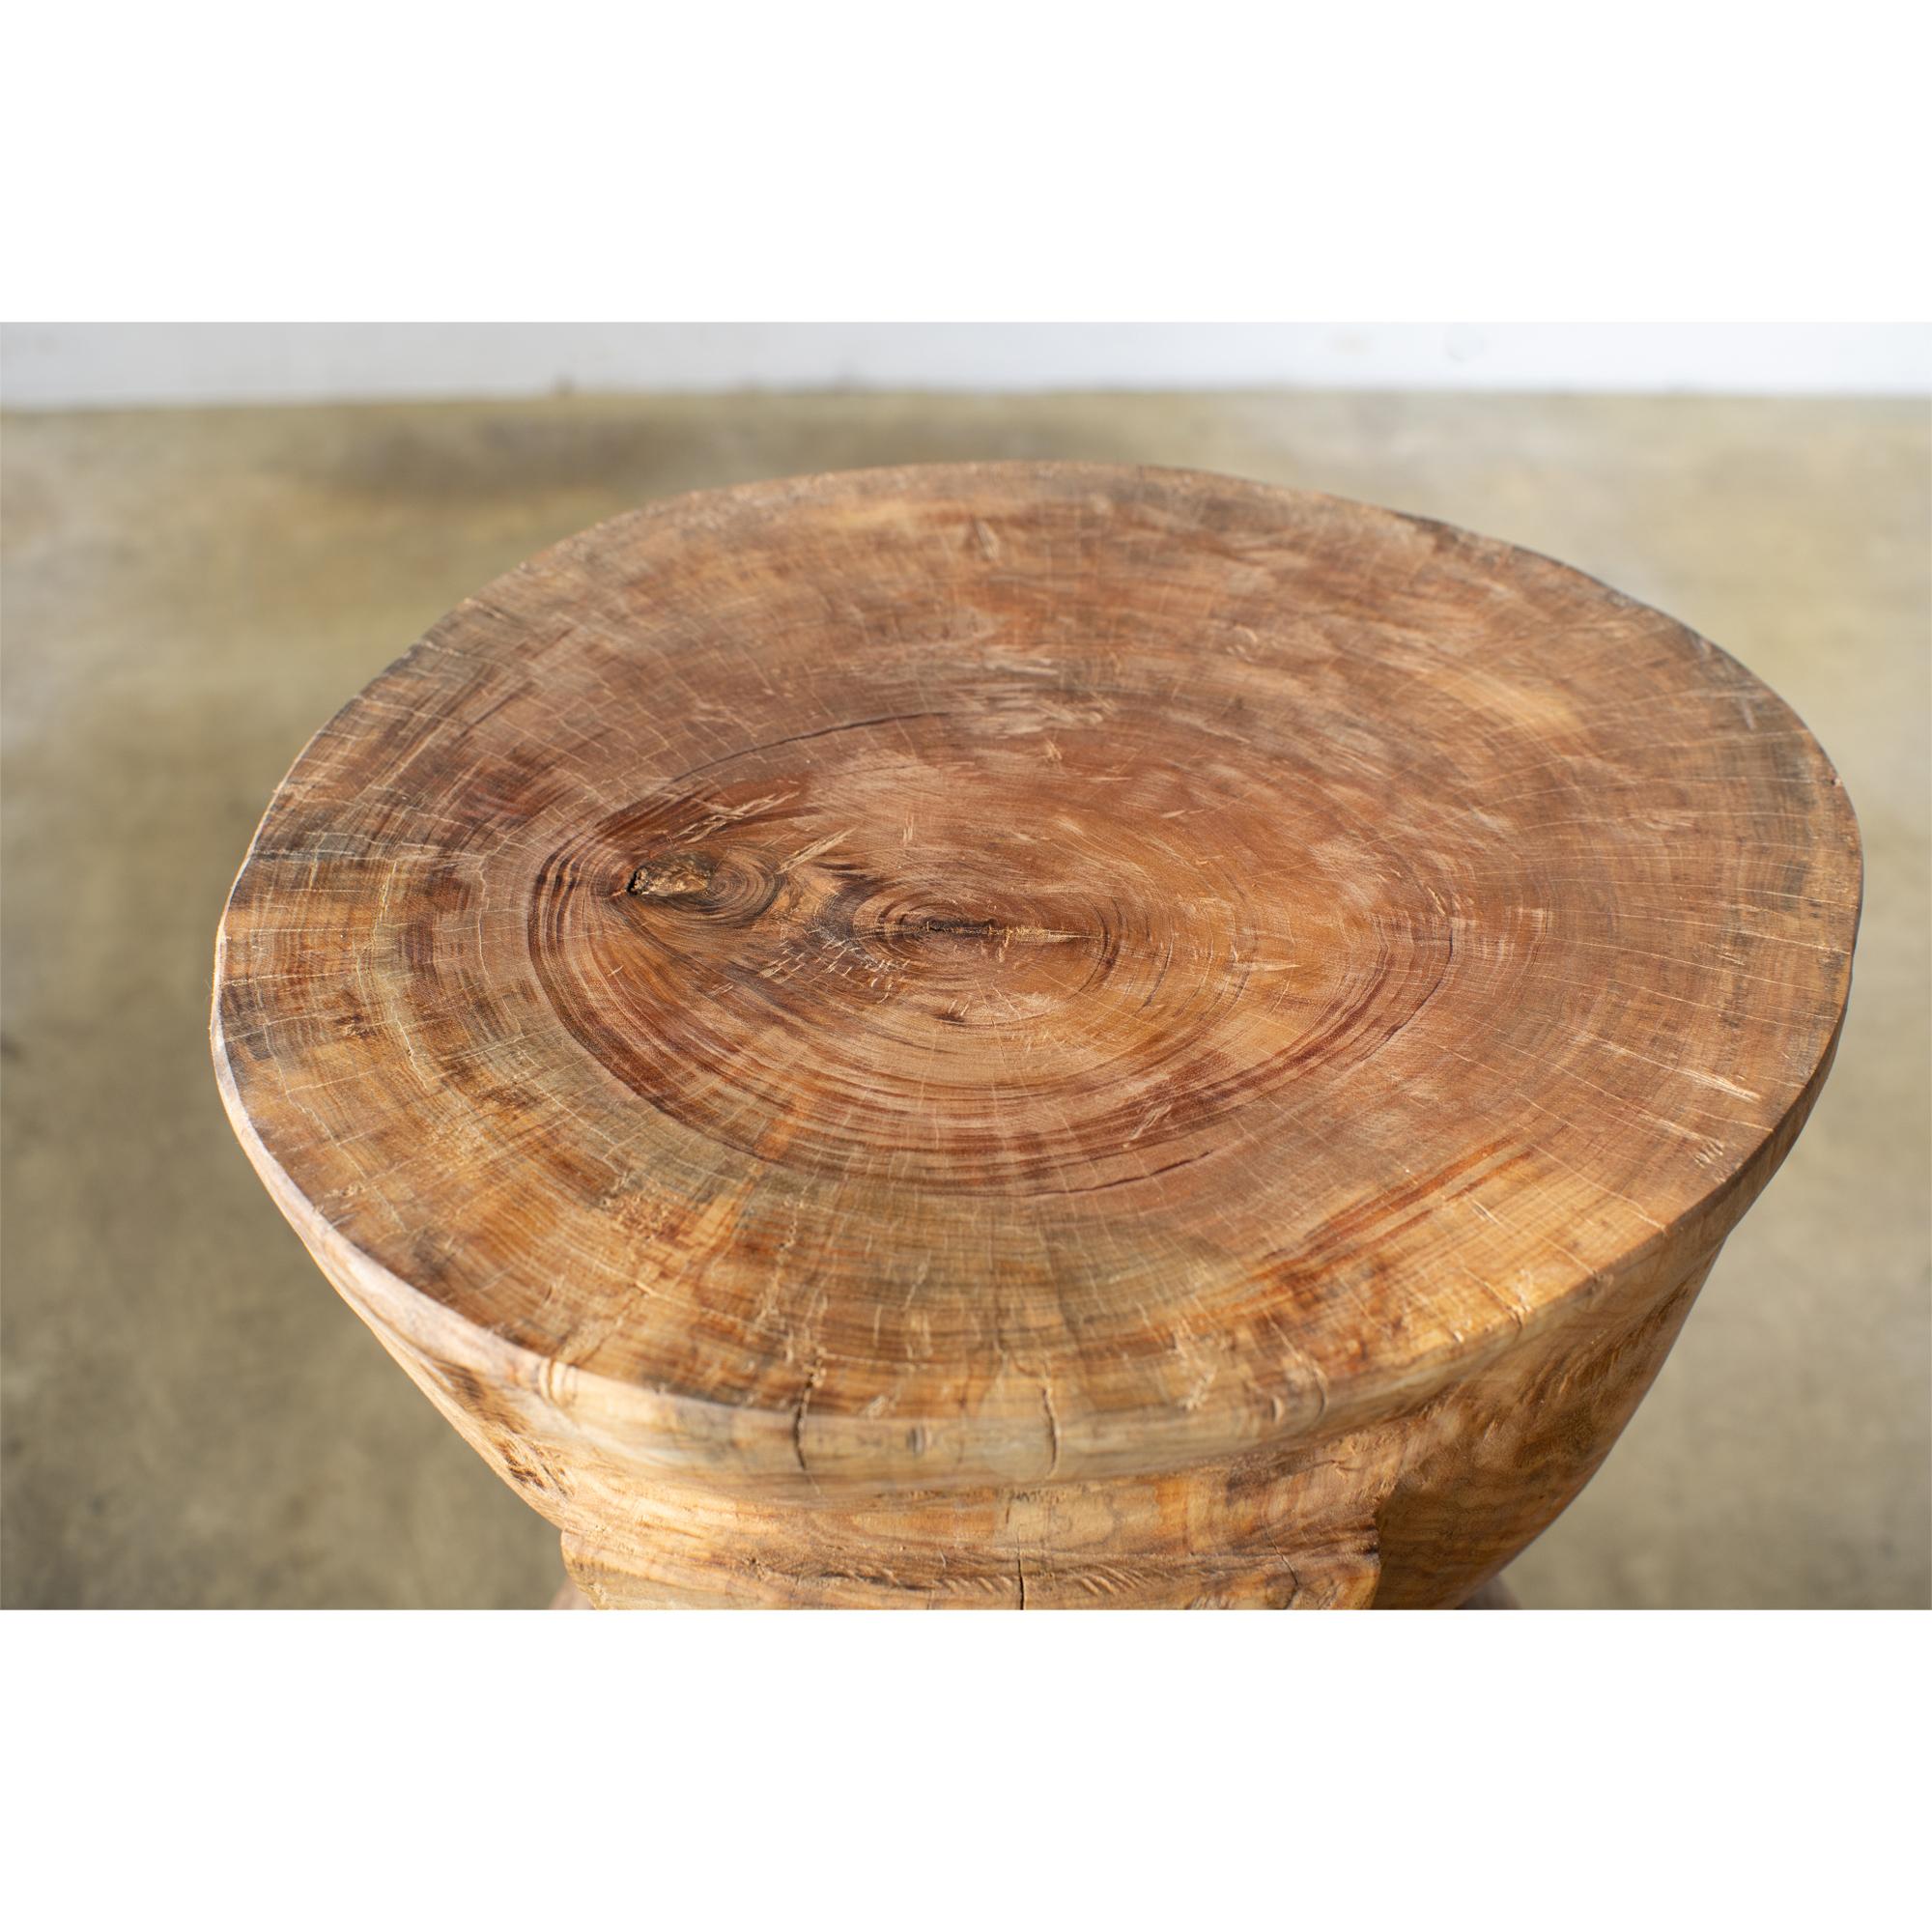 Contemporary Hiroyuki Nishimura Sculptural Side Table Stool 24 Glamping Tribal Style For Sale